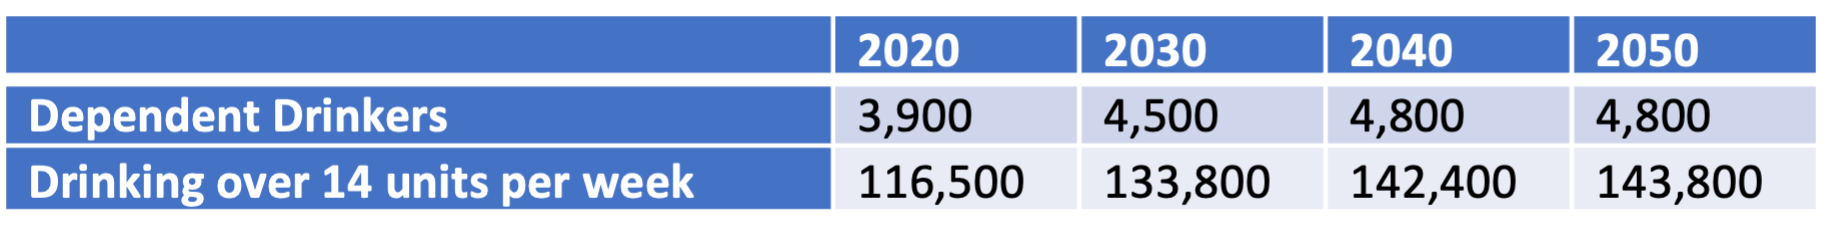 Estimated numbers of dependent drinkers in Wandsworth, 2020-2050